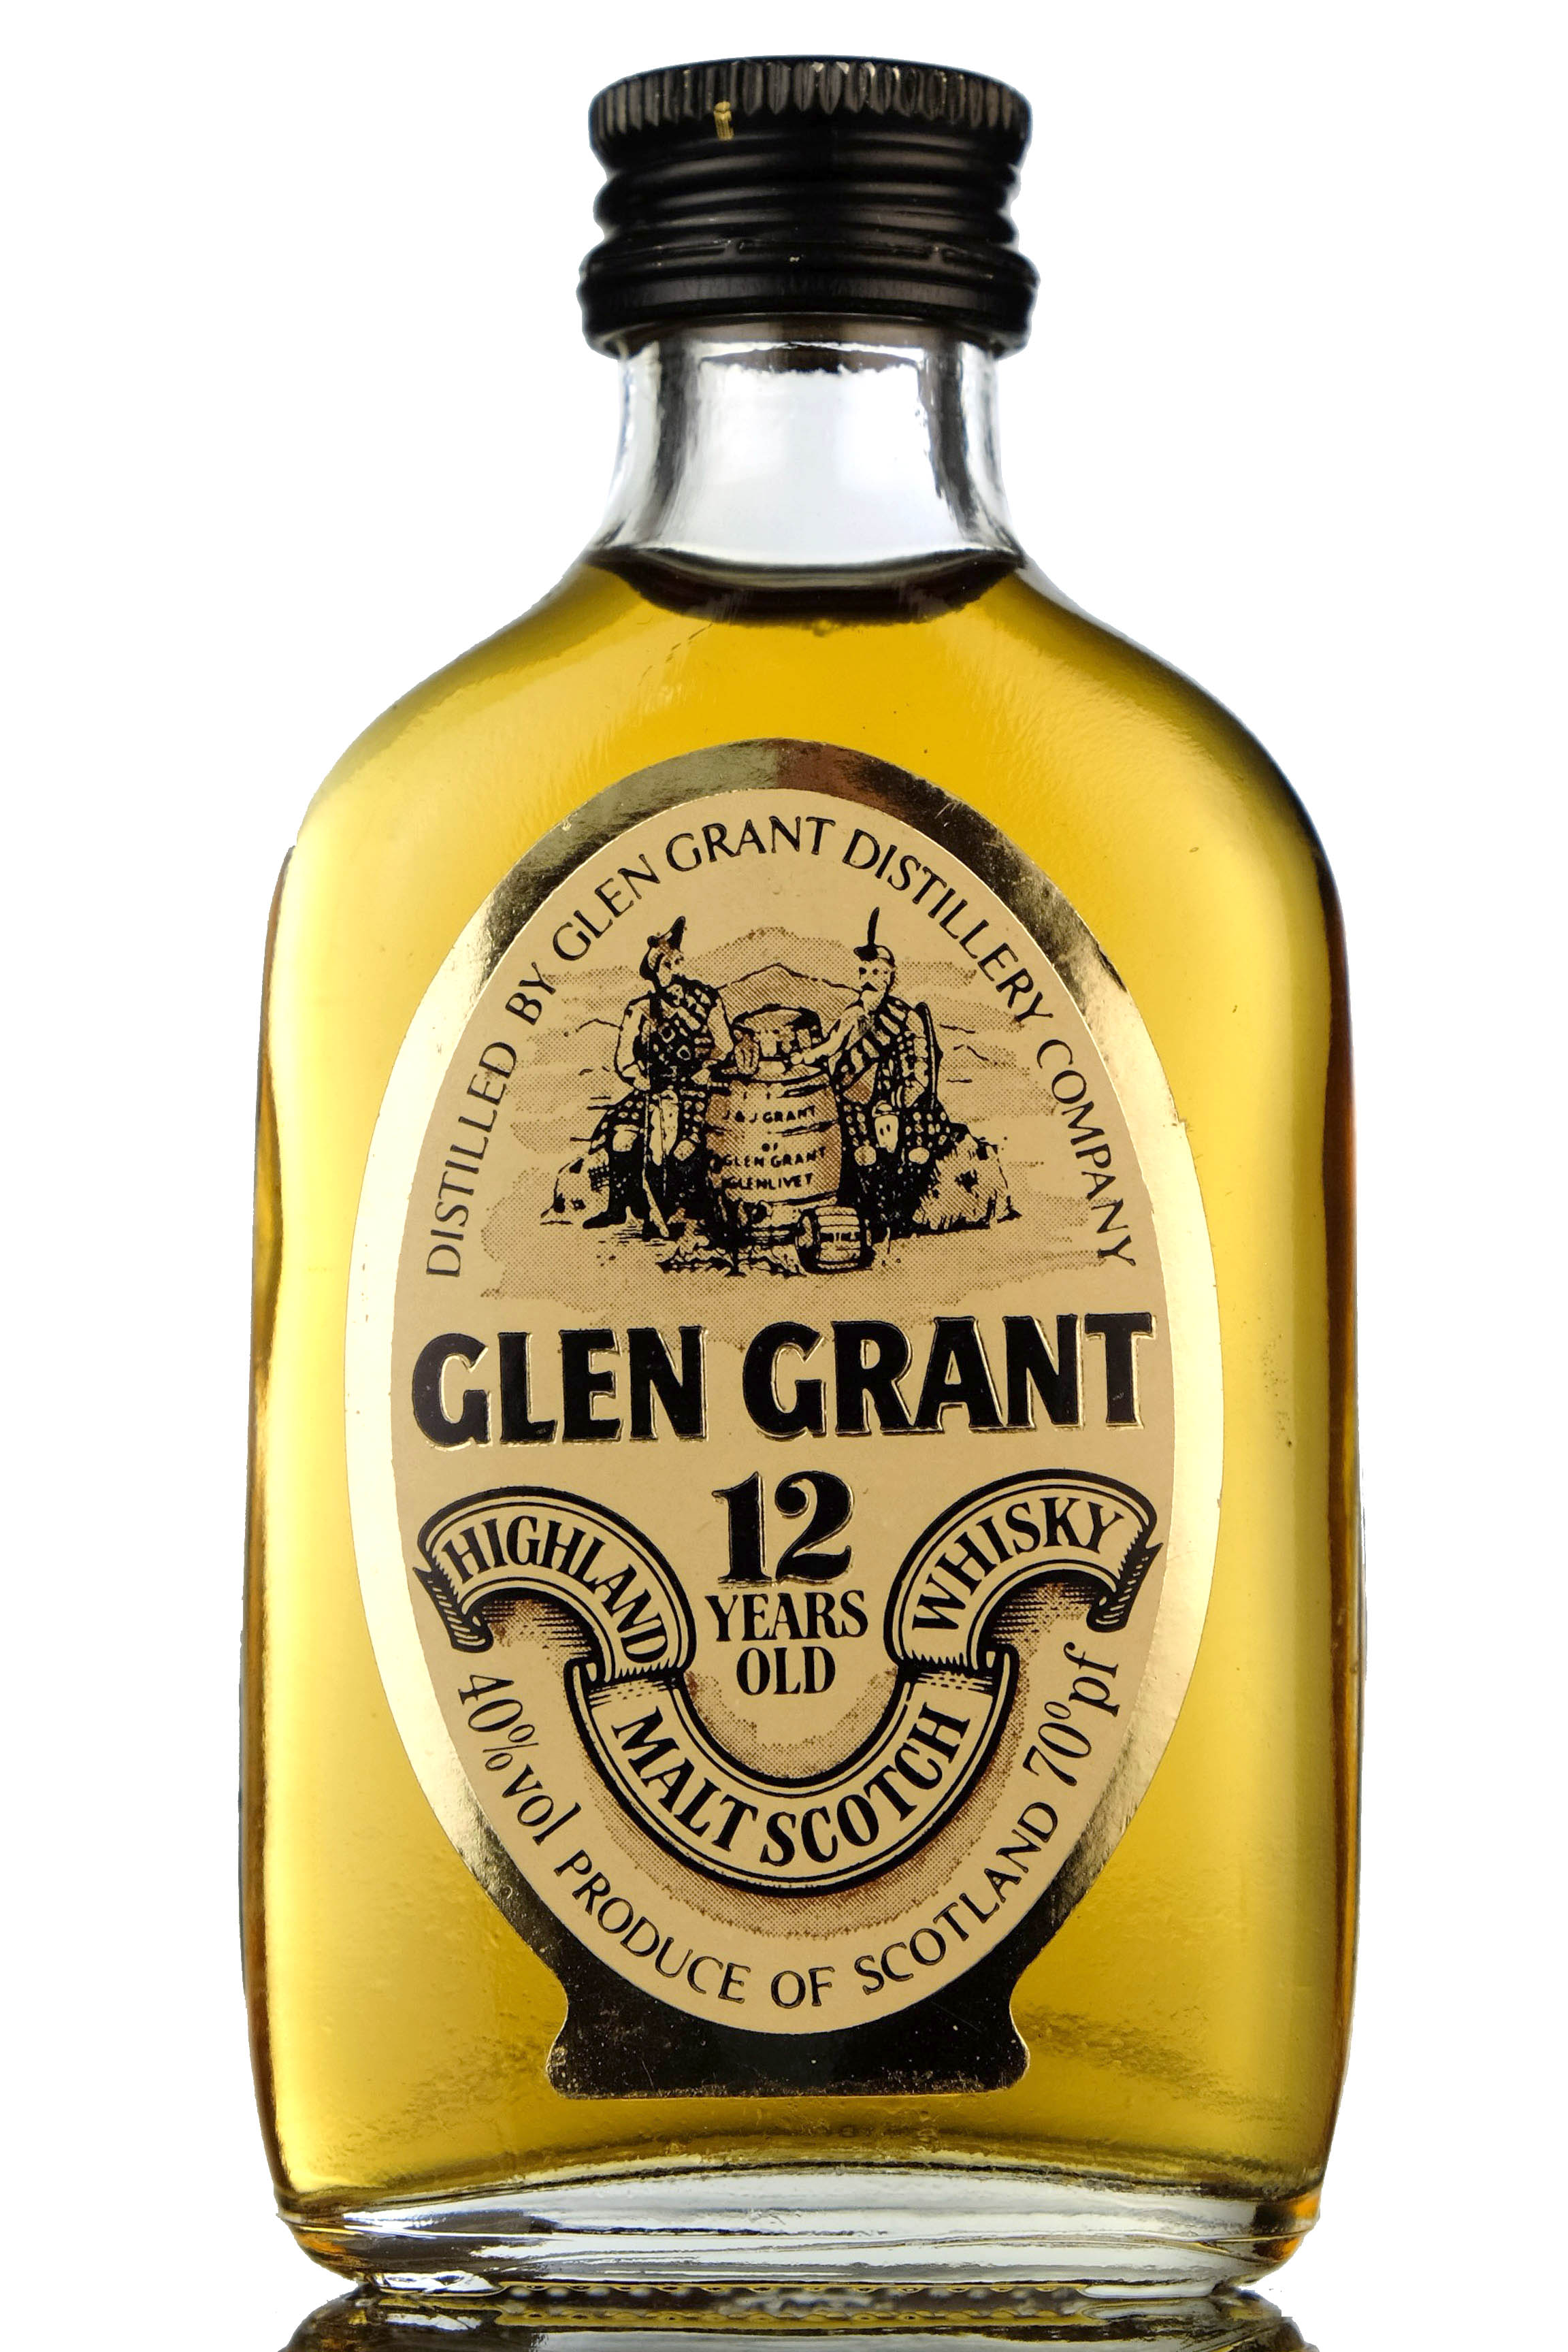 Glen Grant 12 Year Old - 70 Proof Miniature